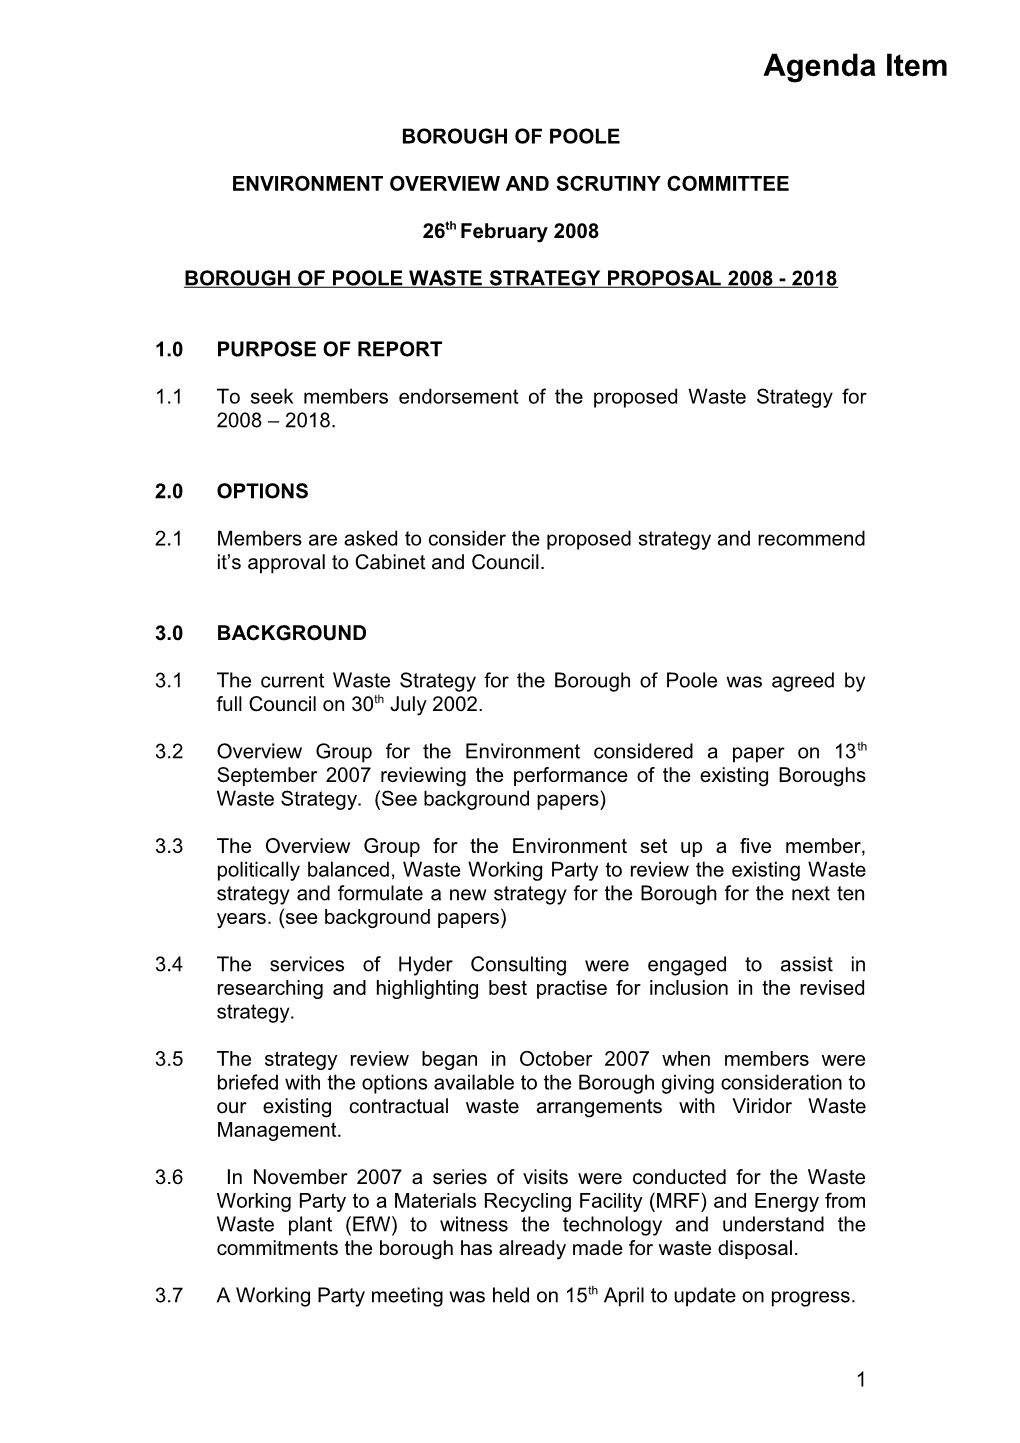 Borough of Poole Waste Strategy Proposal 2008 - 2018